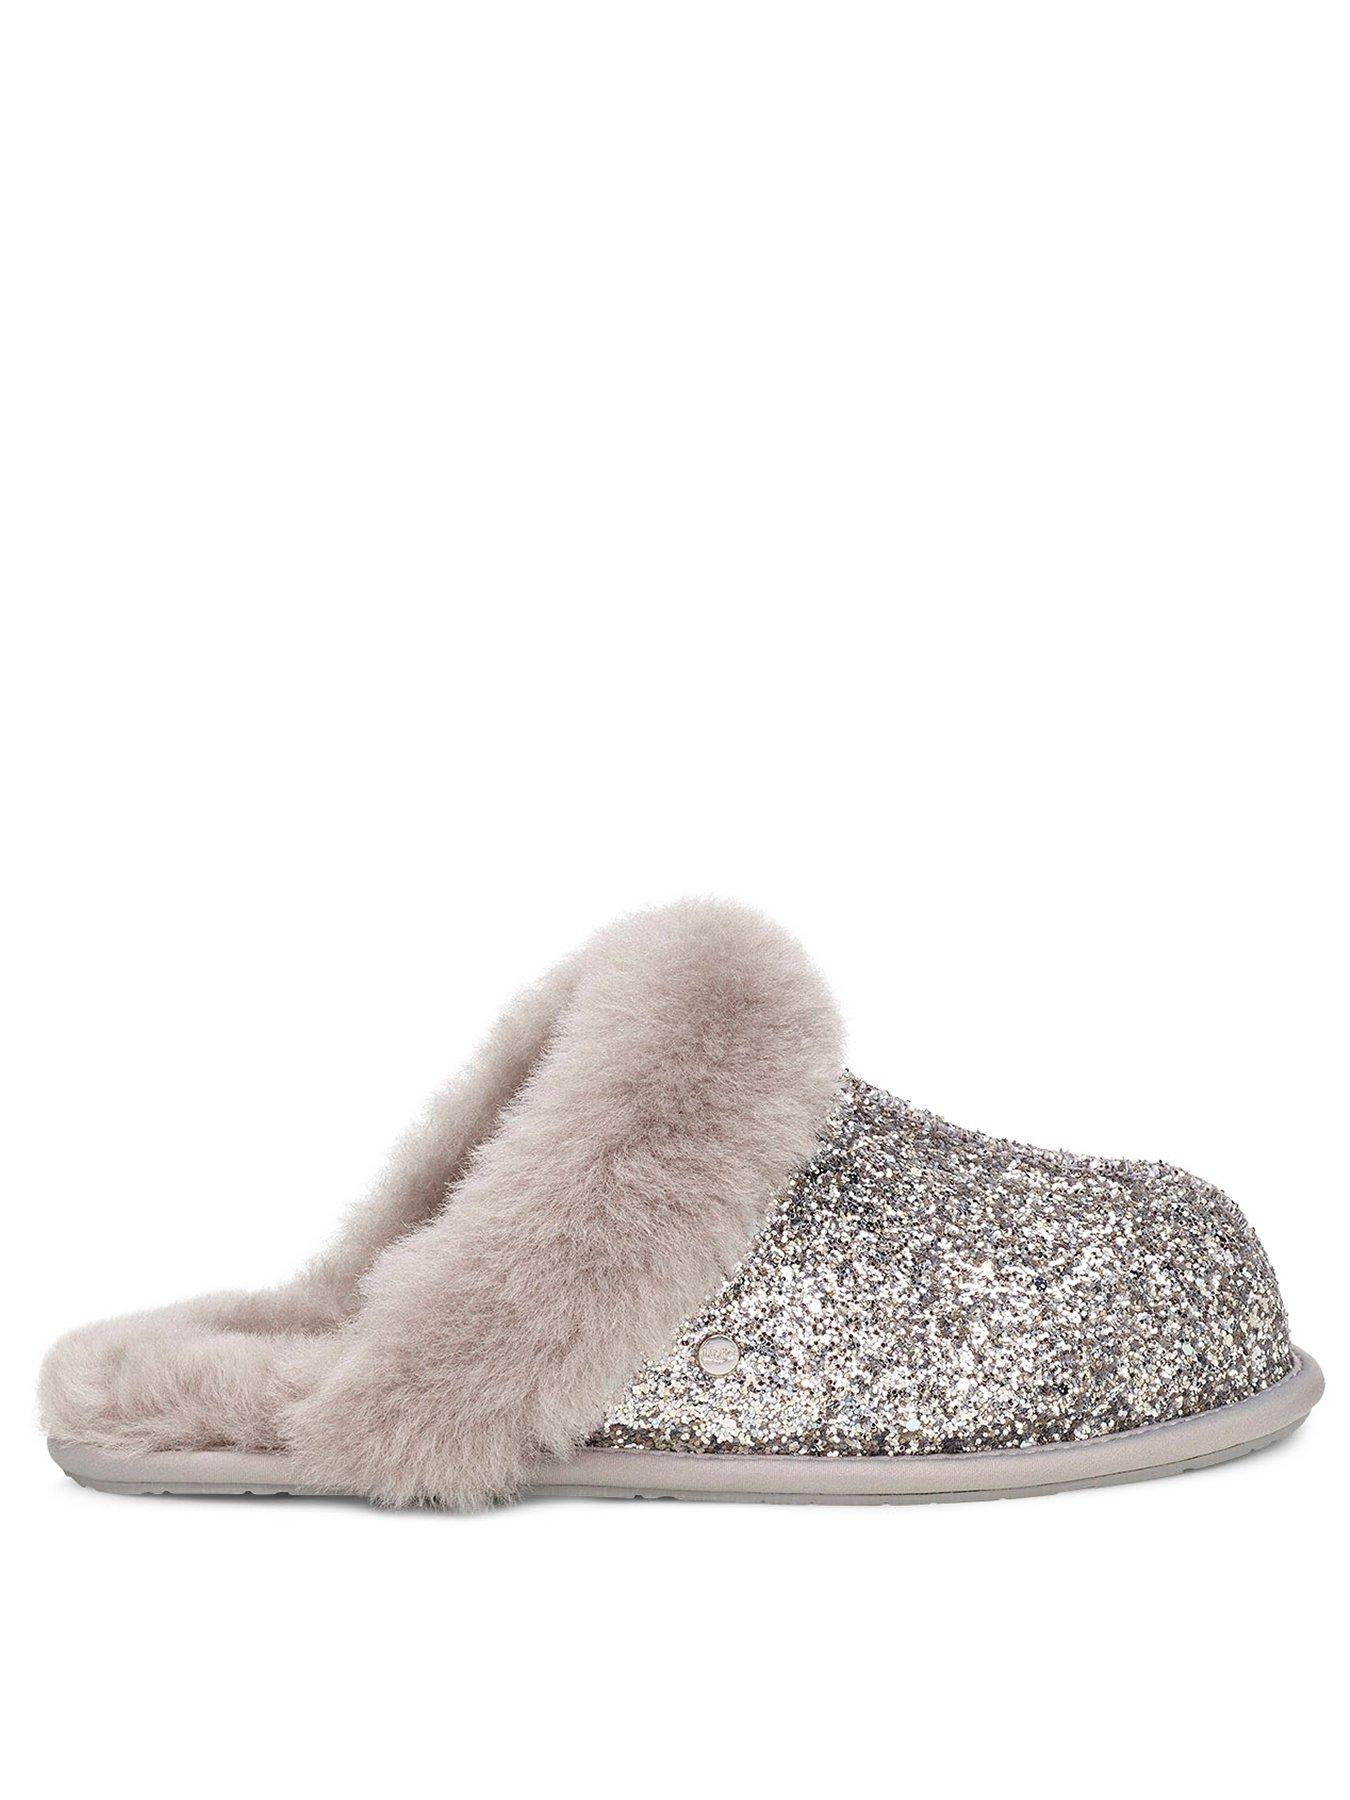 silver ugg slippers